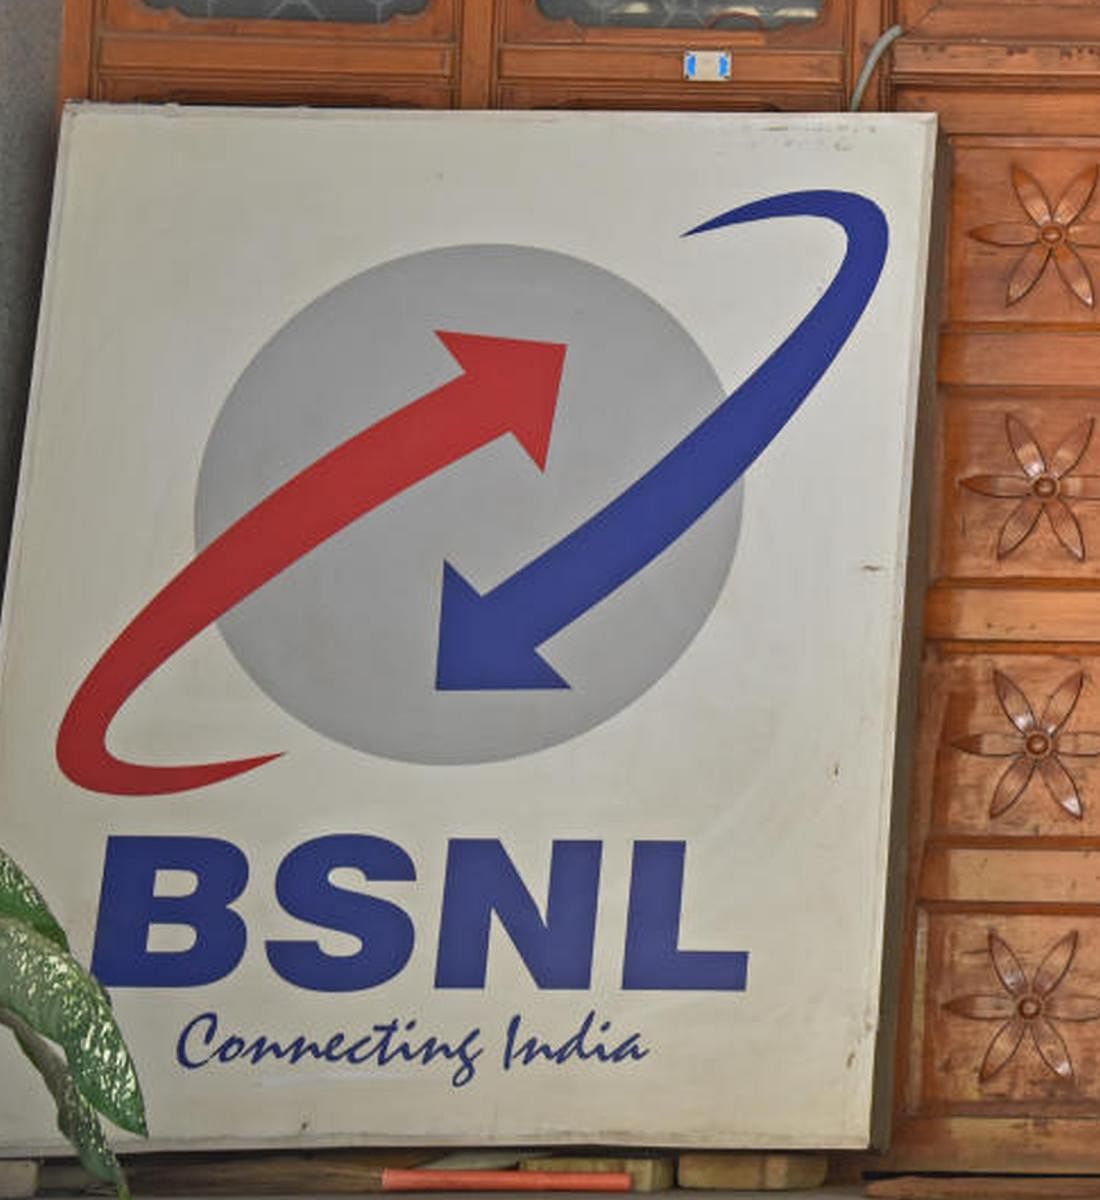 BSNL eyes Rs 300 cr from asset monetisation in FY20